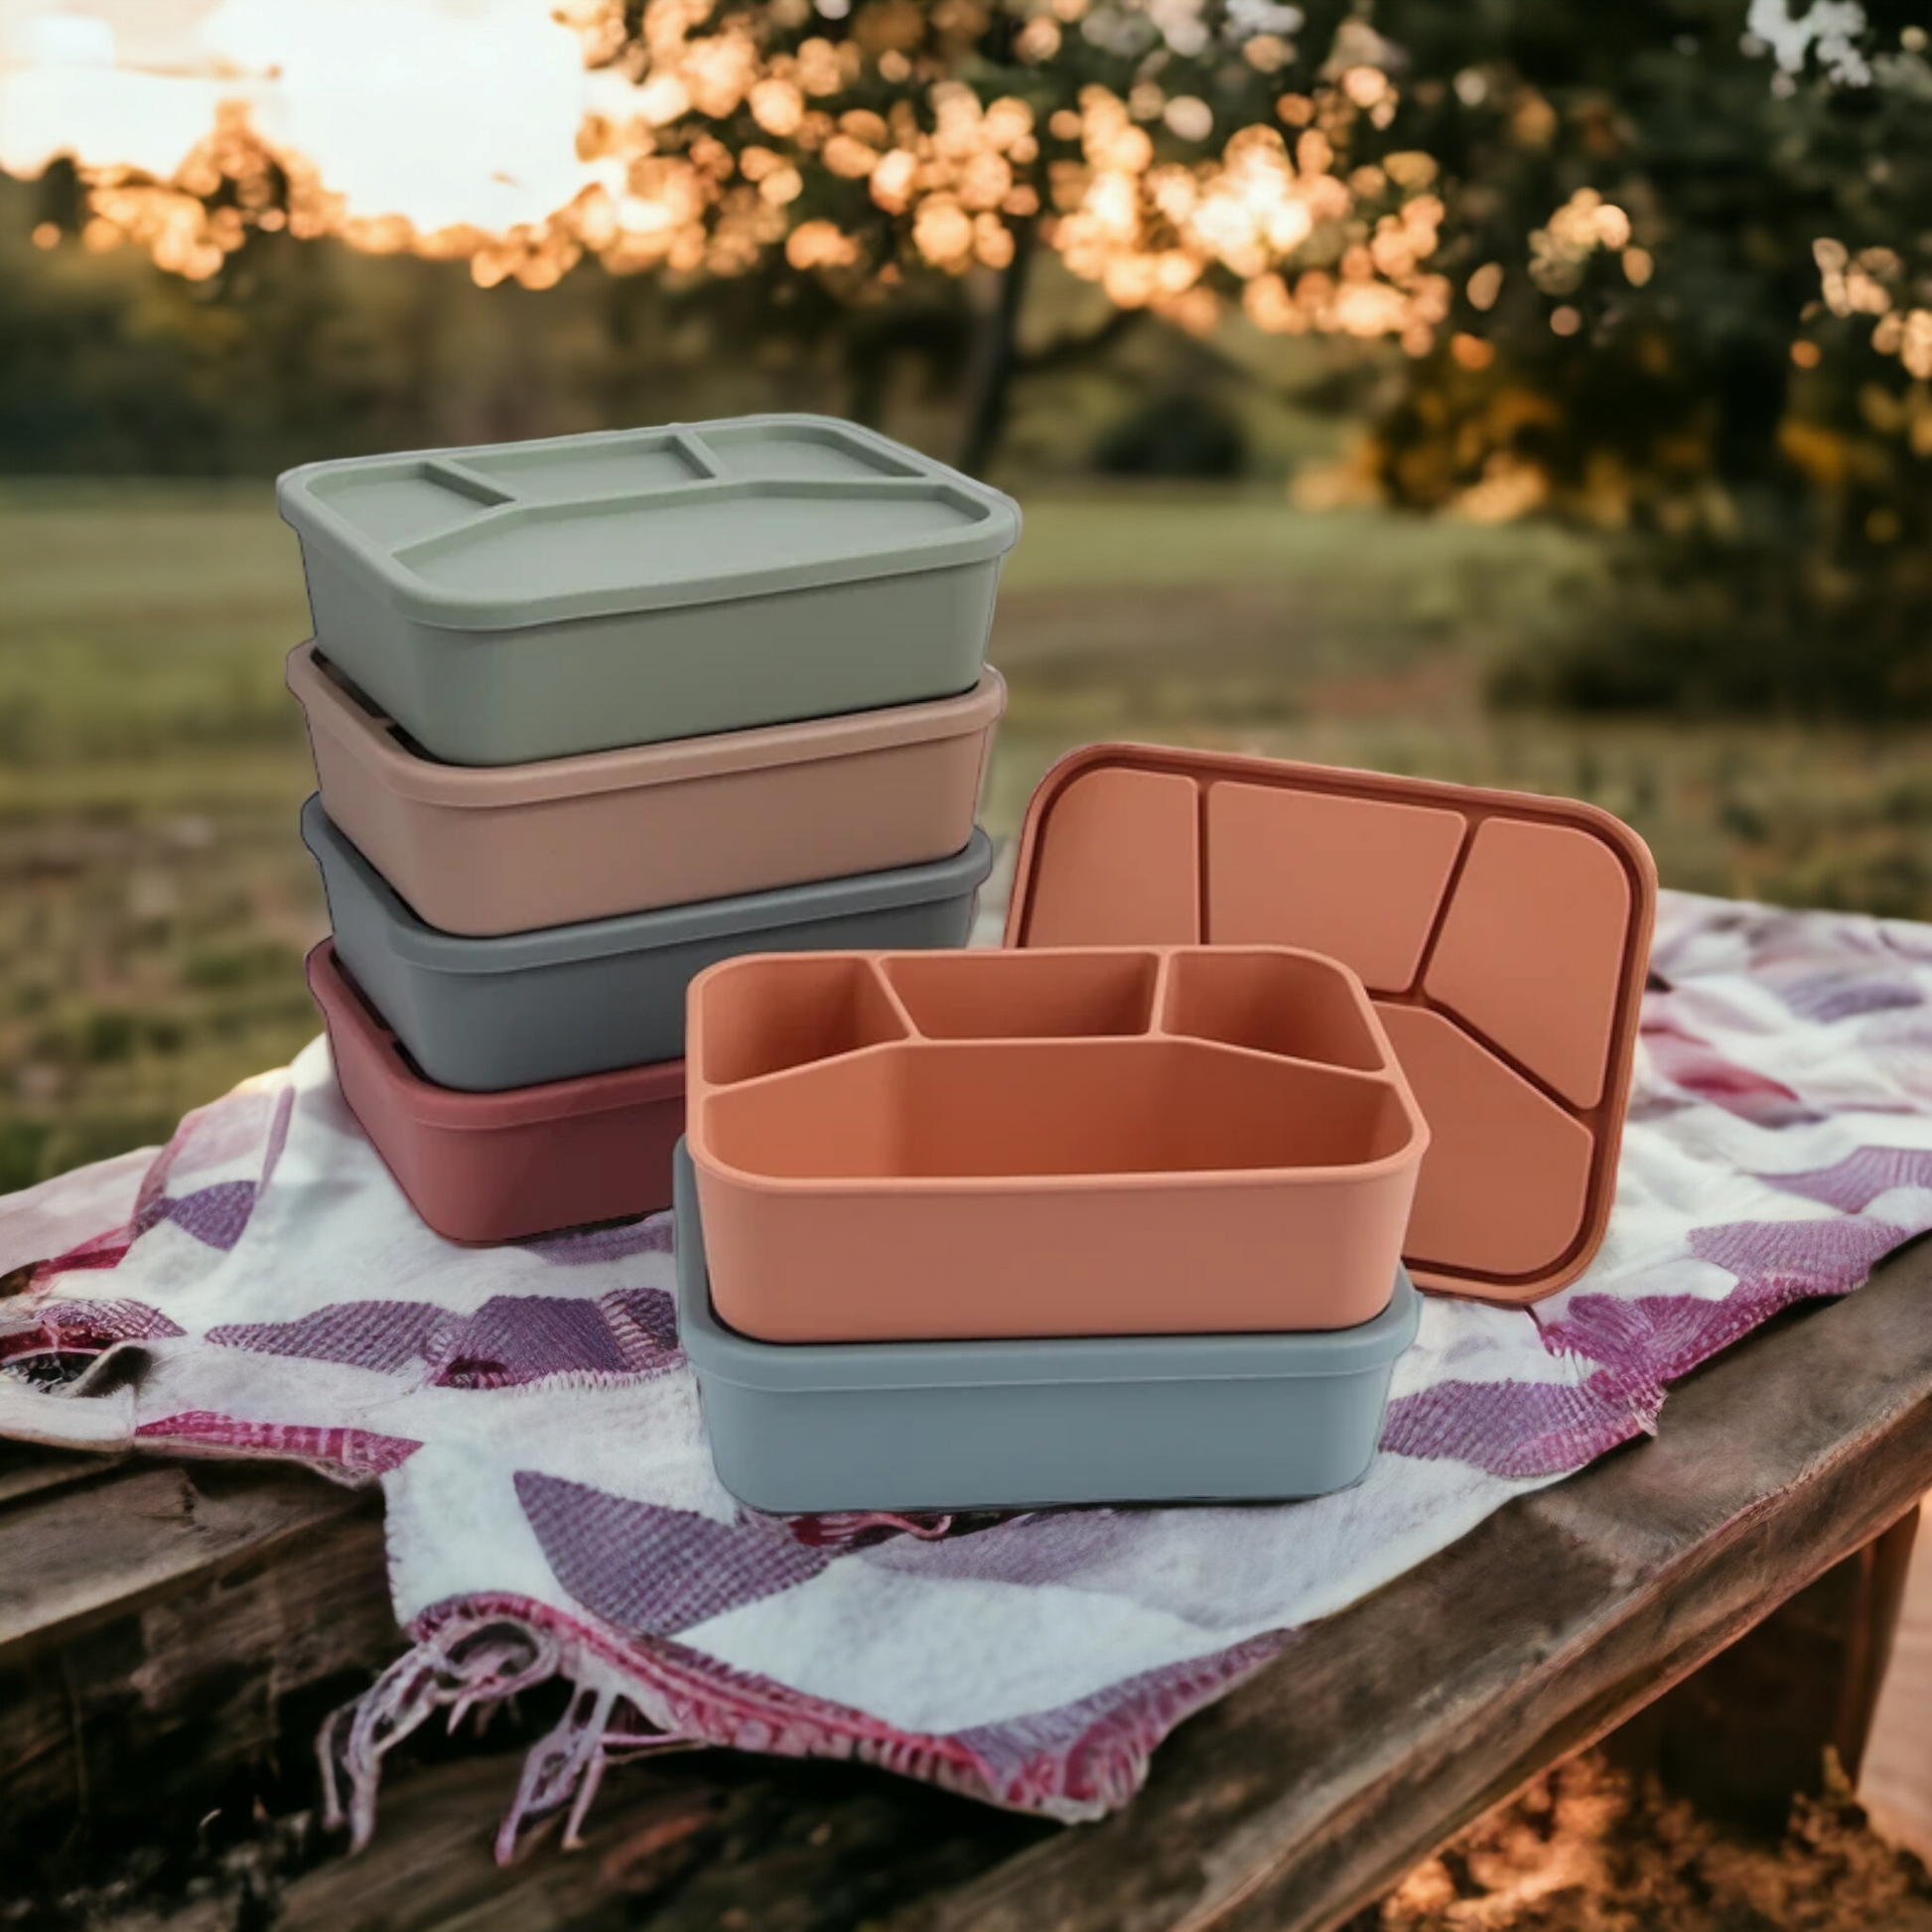 Kitcheniva Bento Lunch Box With 4 Compartment Pink, 1 Pack - Harris Teeter